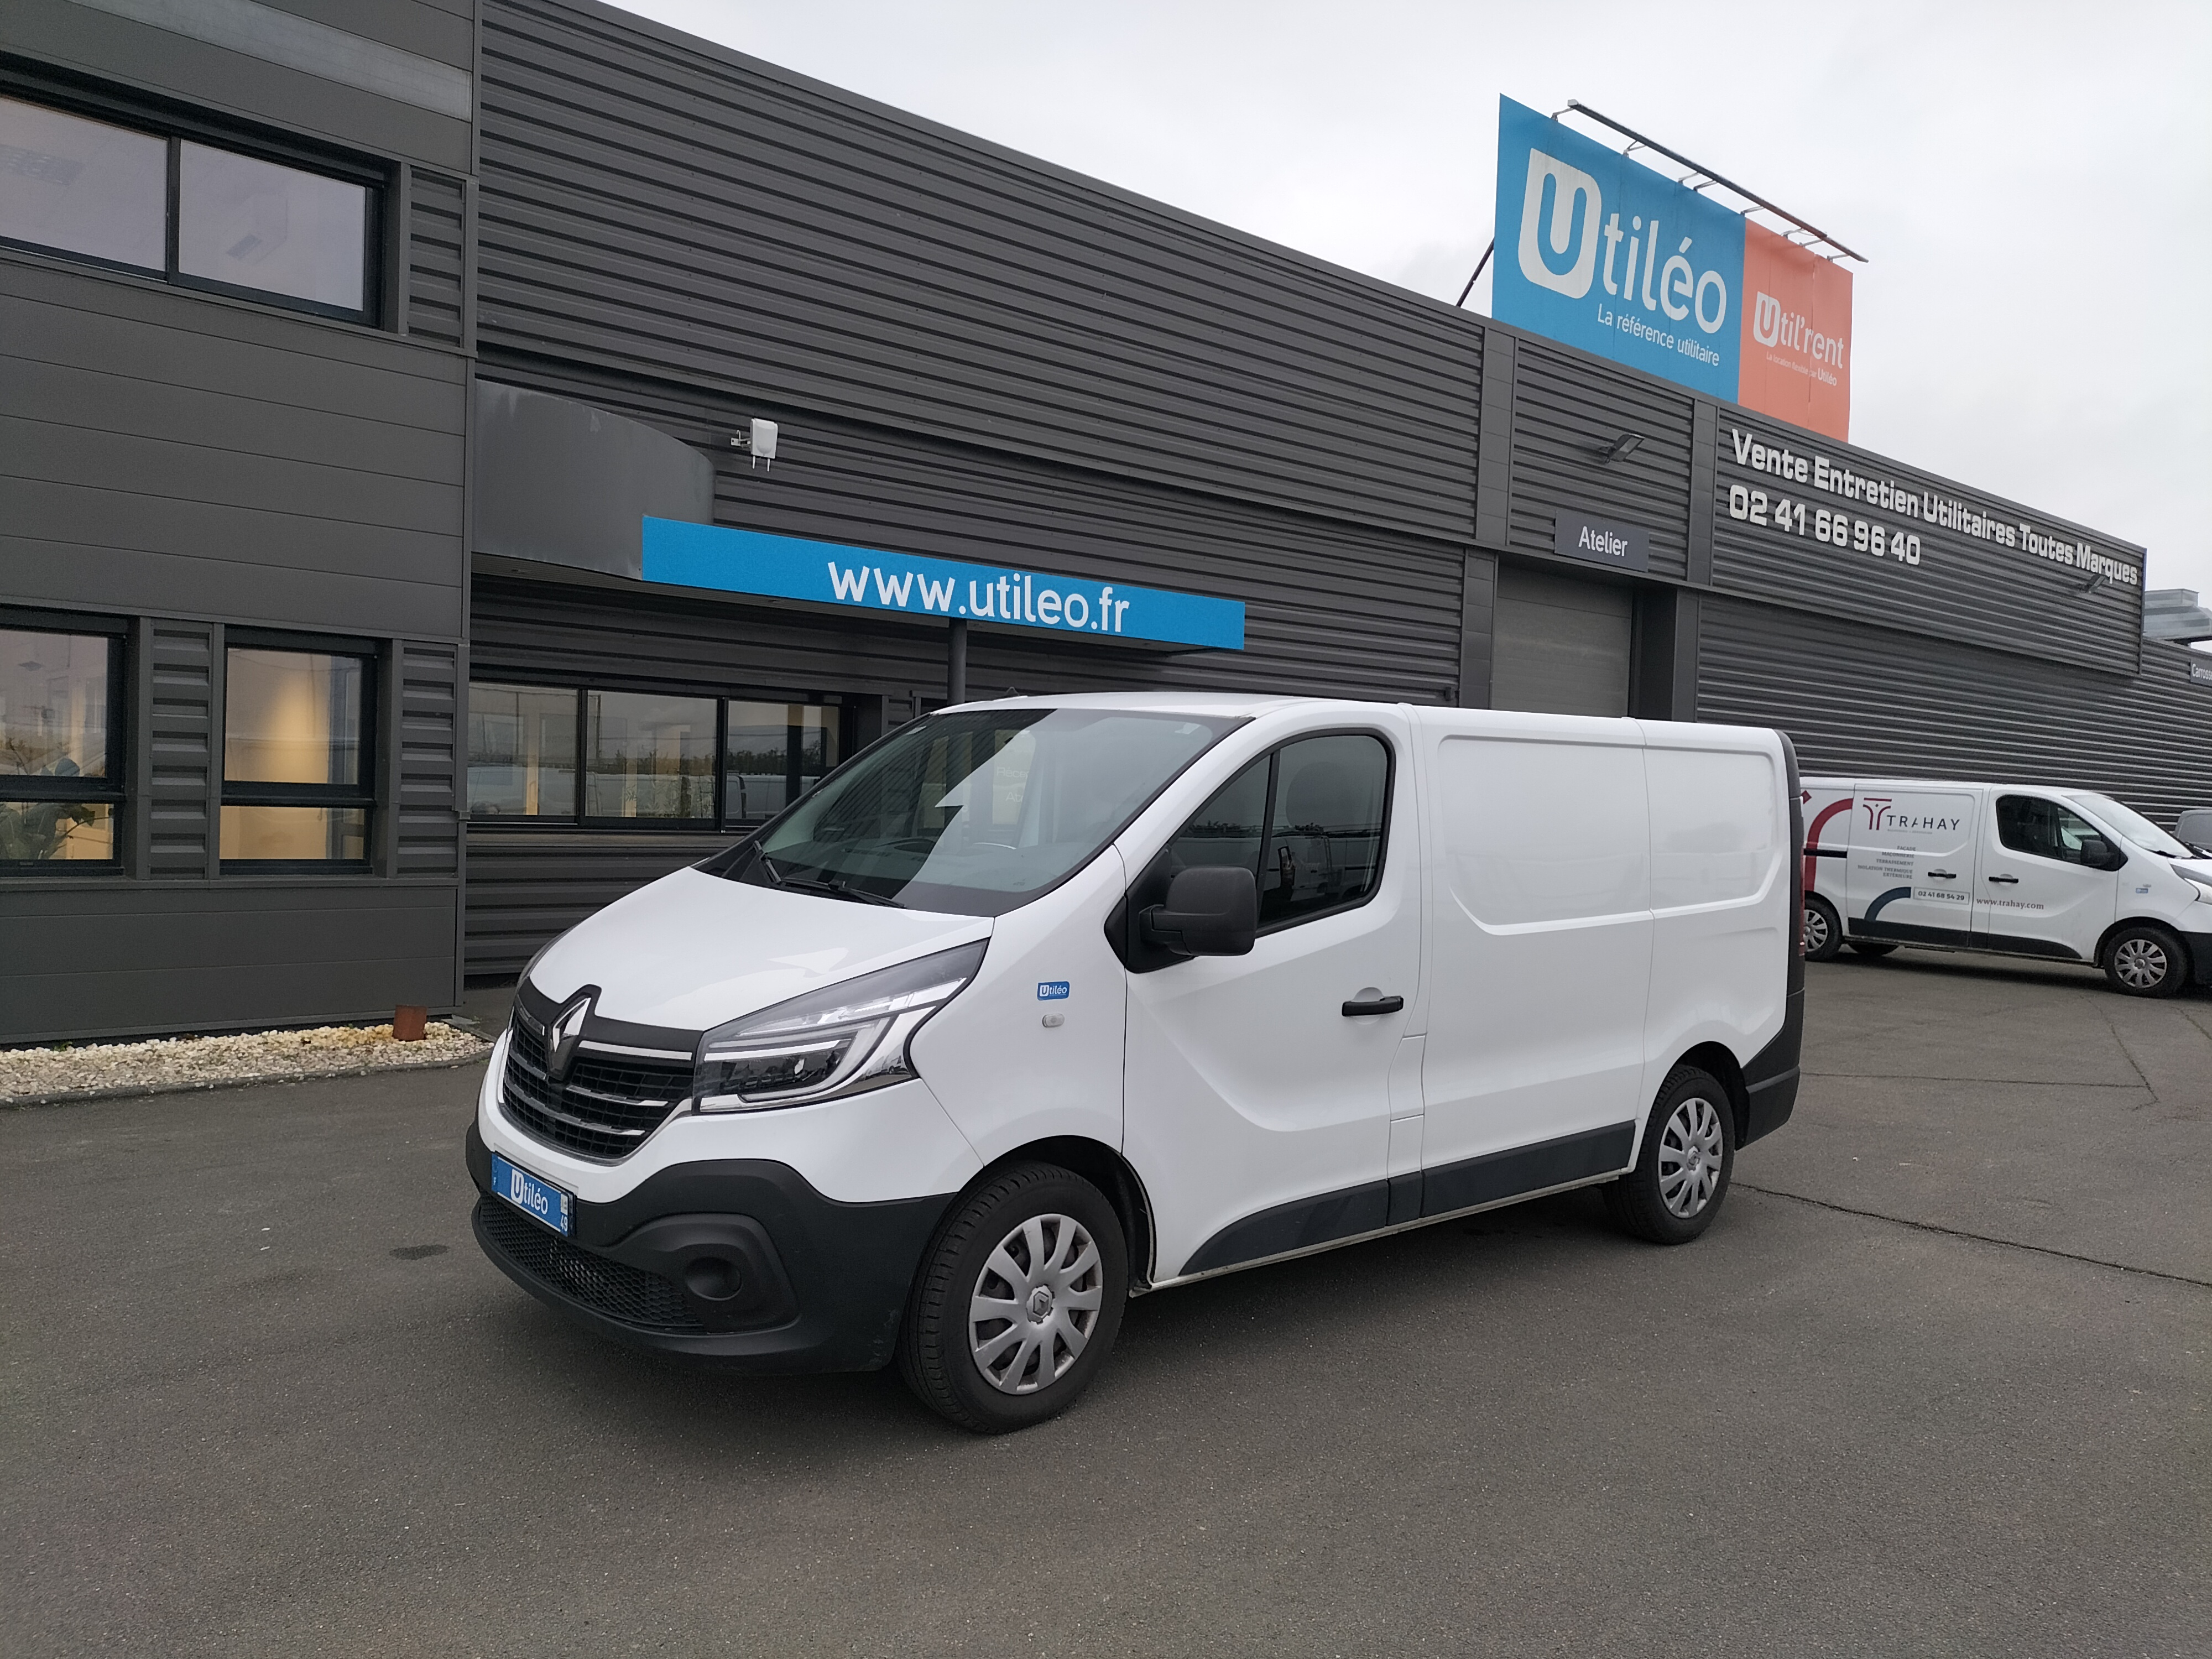 Fourgons Compacts RENAULT TRAFIC III FG 271699 Vue 1